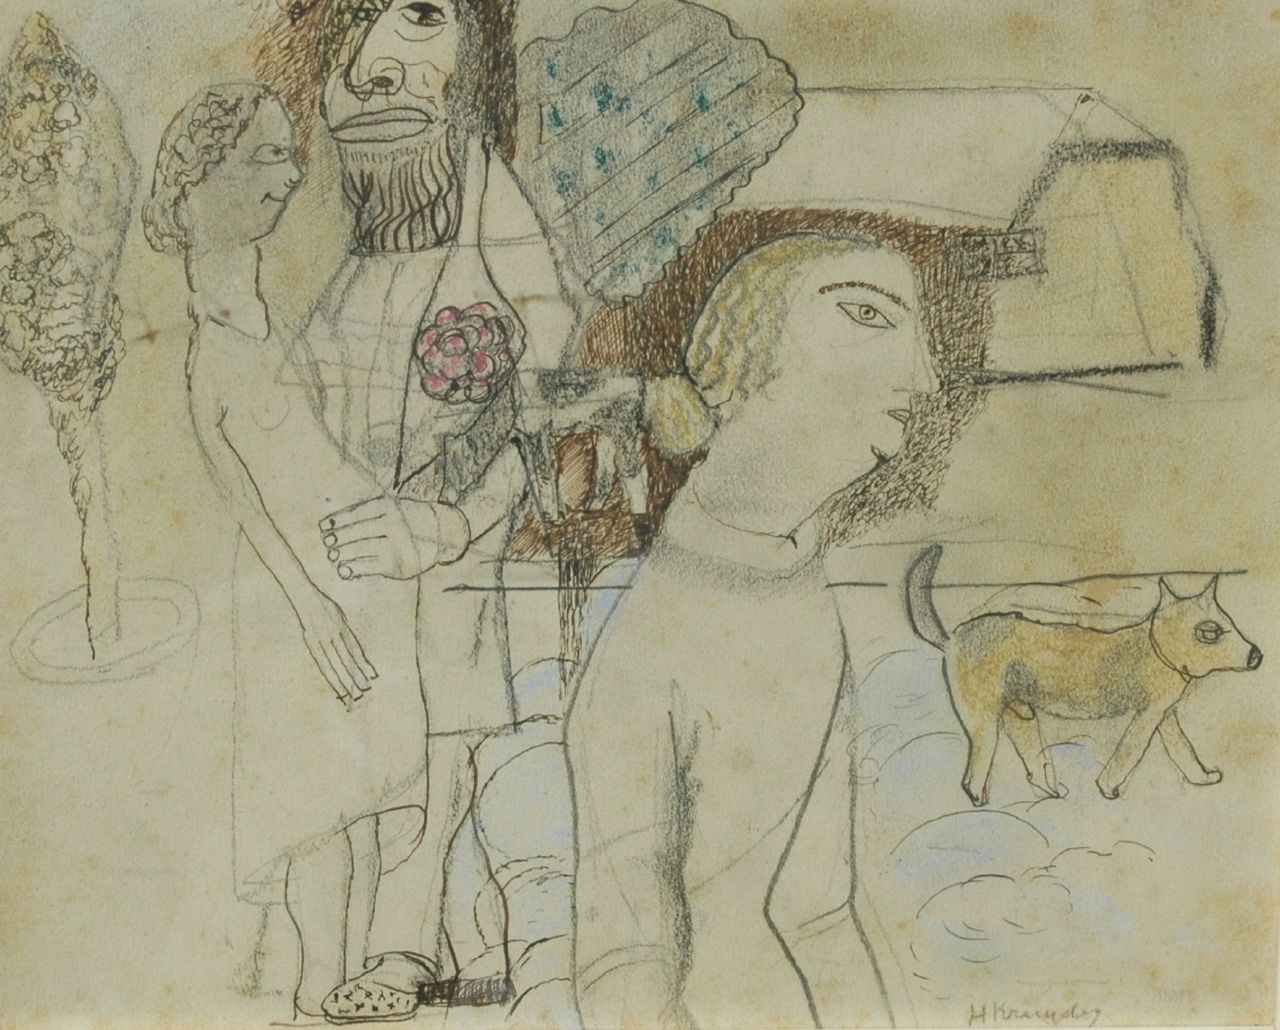 Kruyder H.J.  | 'Herman' Justus Kruyder, The protector of the unwanted pregnant woman, pencil, pen, ink and pastel on paper 17.2 x 21.3 cm, signed l.r. and painted ca. 1922-1926